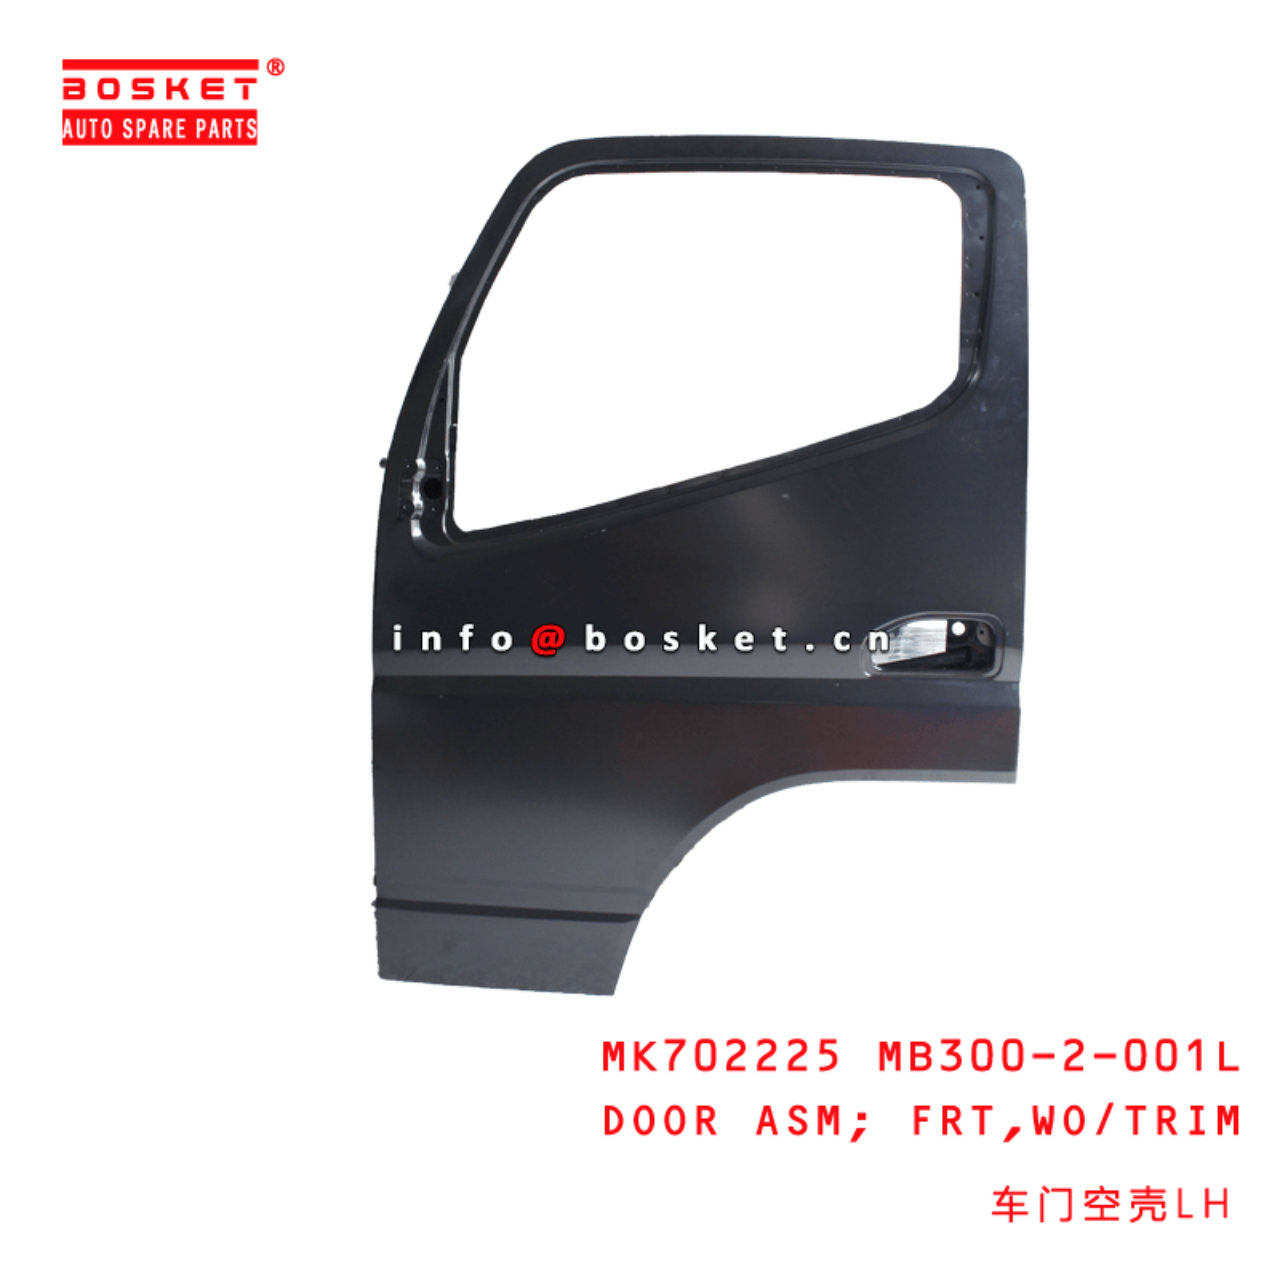 MK702225 MB300-2-001L Without Trim Front Door Assembly Suitable For MITSUBISHI FUSO CANTER RUS